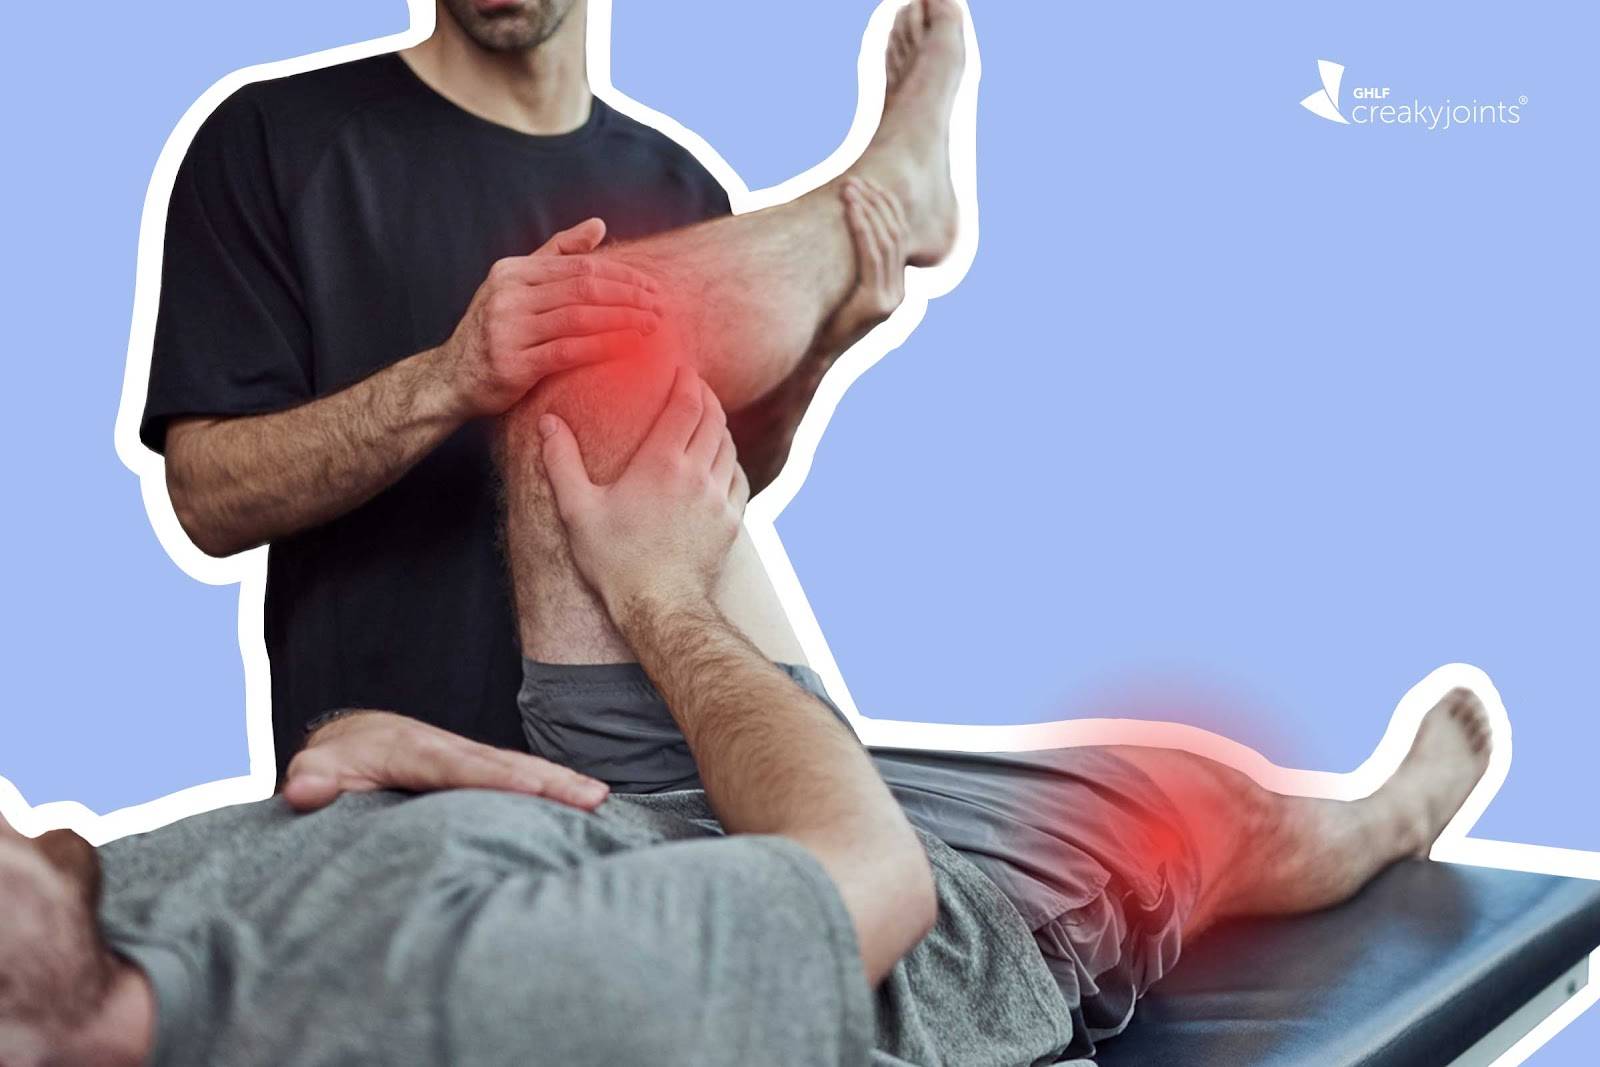 Does manual therapy actually work?